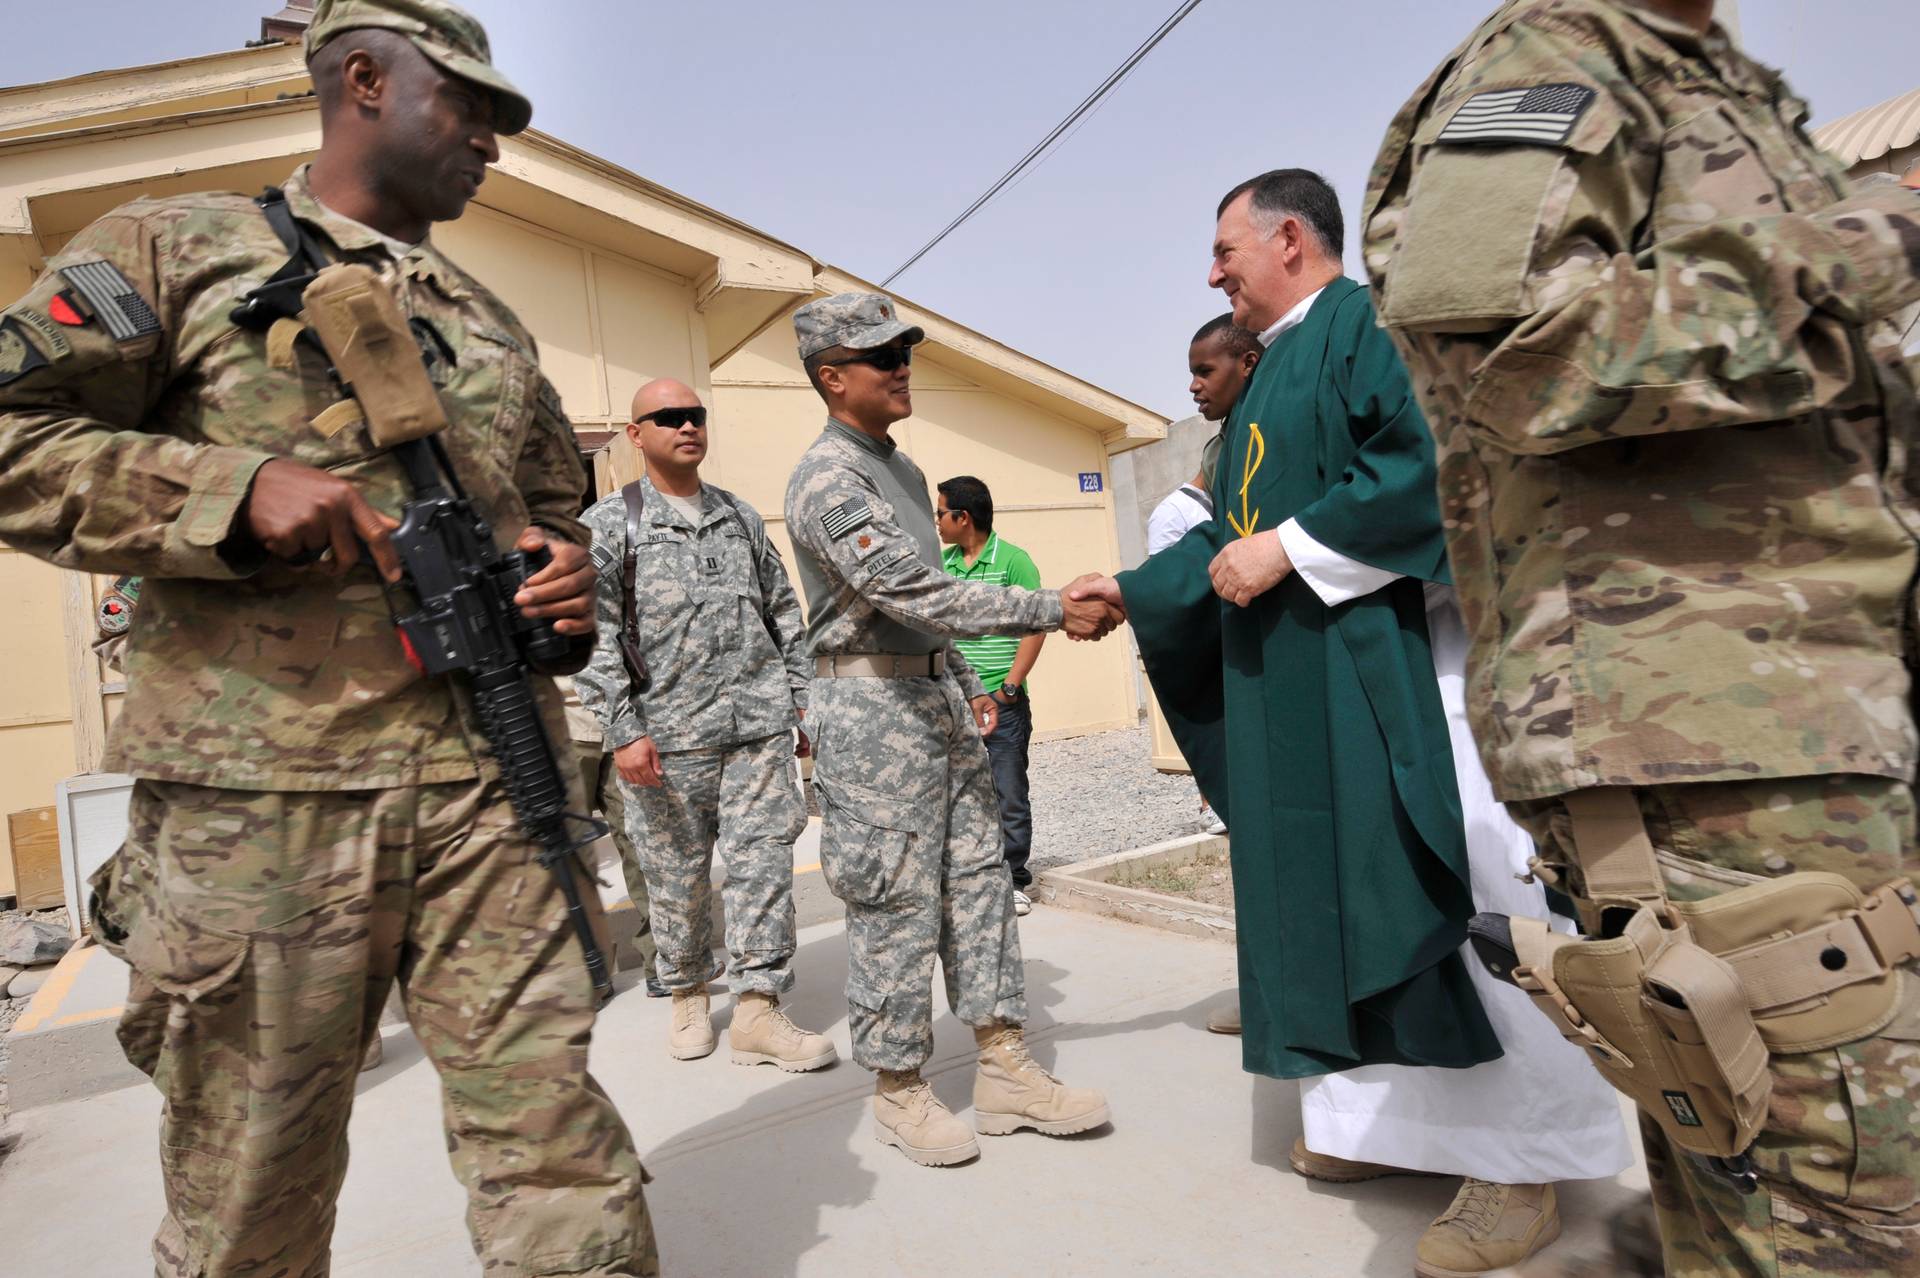 Chaplain Fintan Kilmurray greets U.S. soldiers after officiating a Sunday Mass service in Kandahar military base in southern Afghanistan, 2011